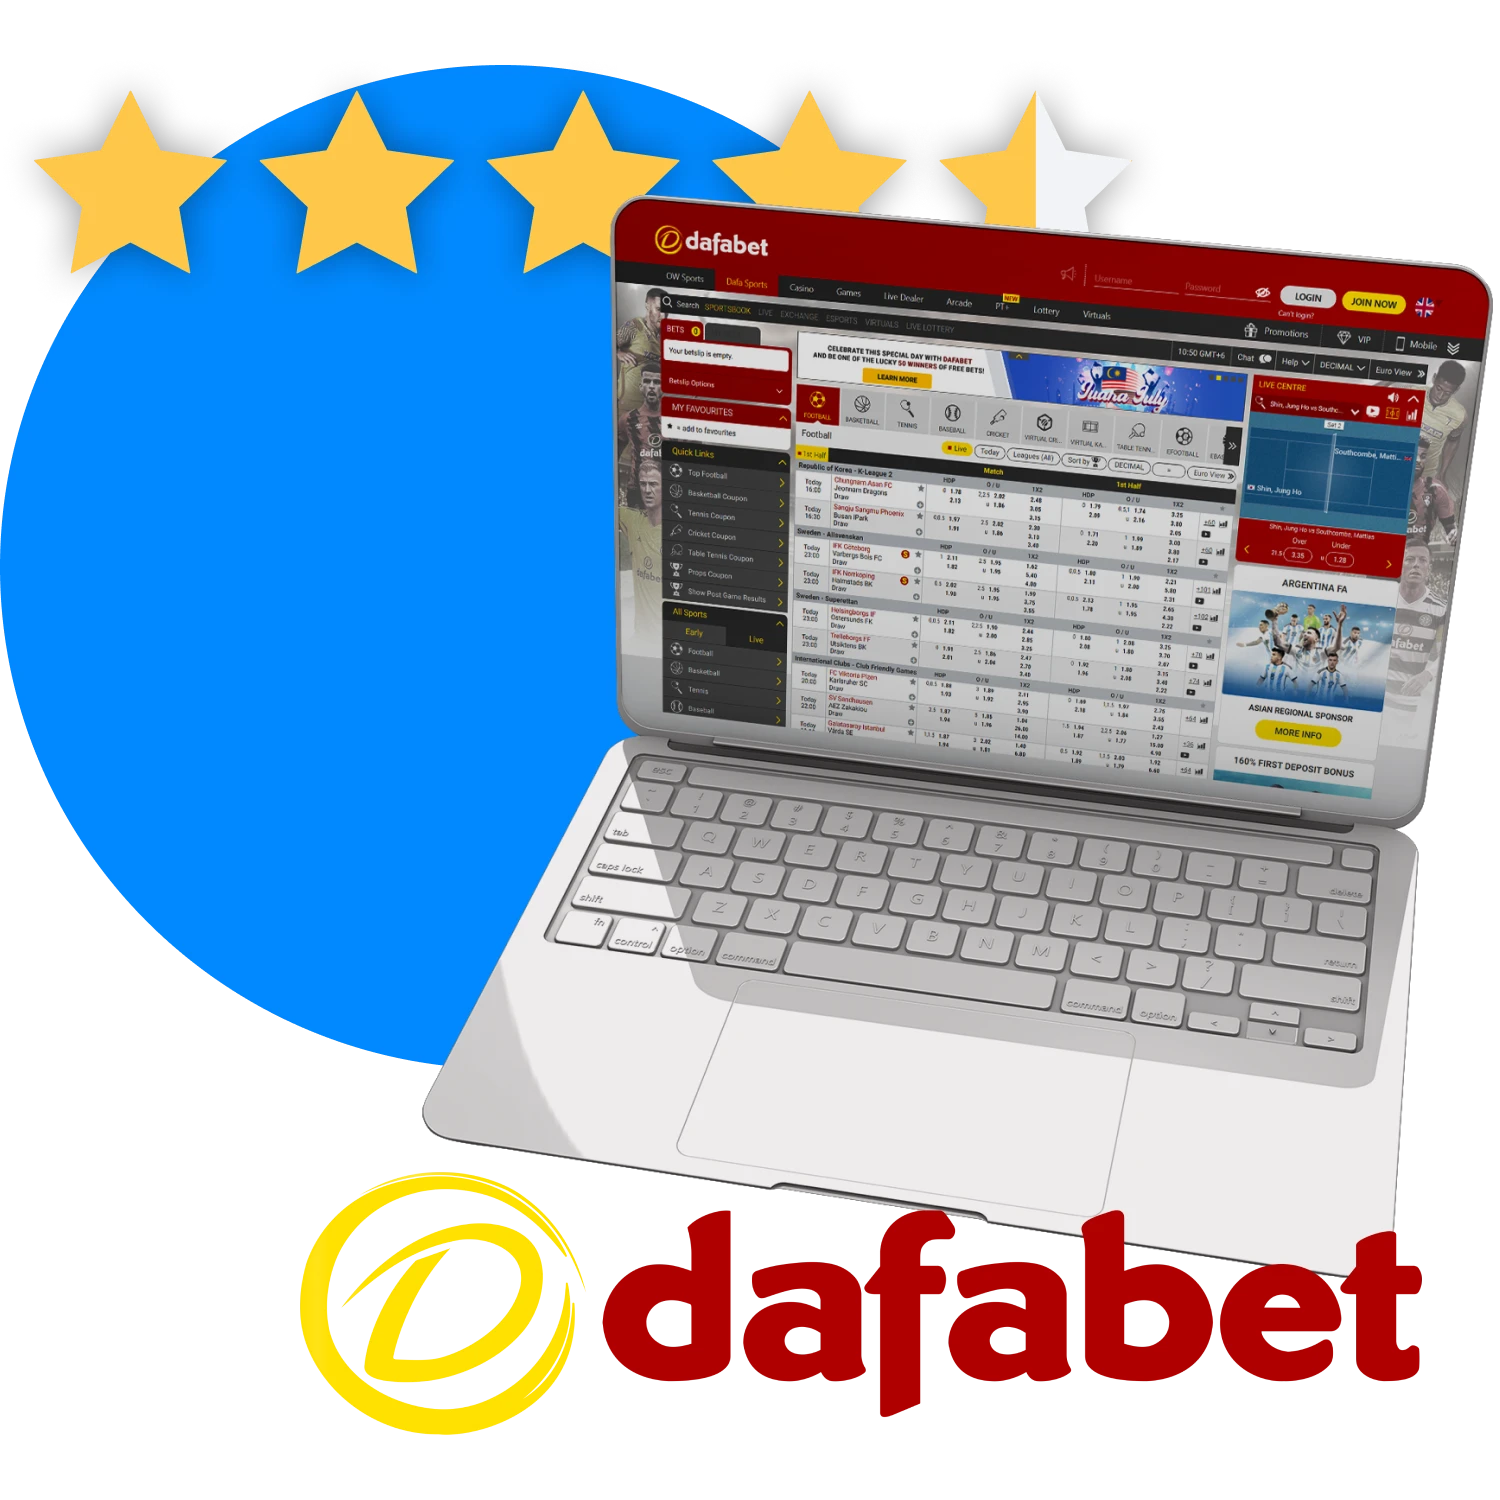 Learn more about users' reviews for the Dafabet betting site.